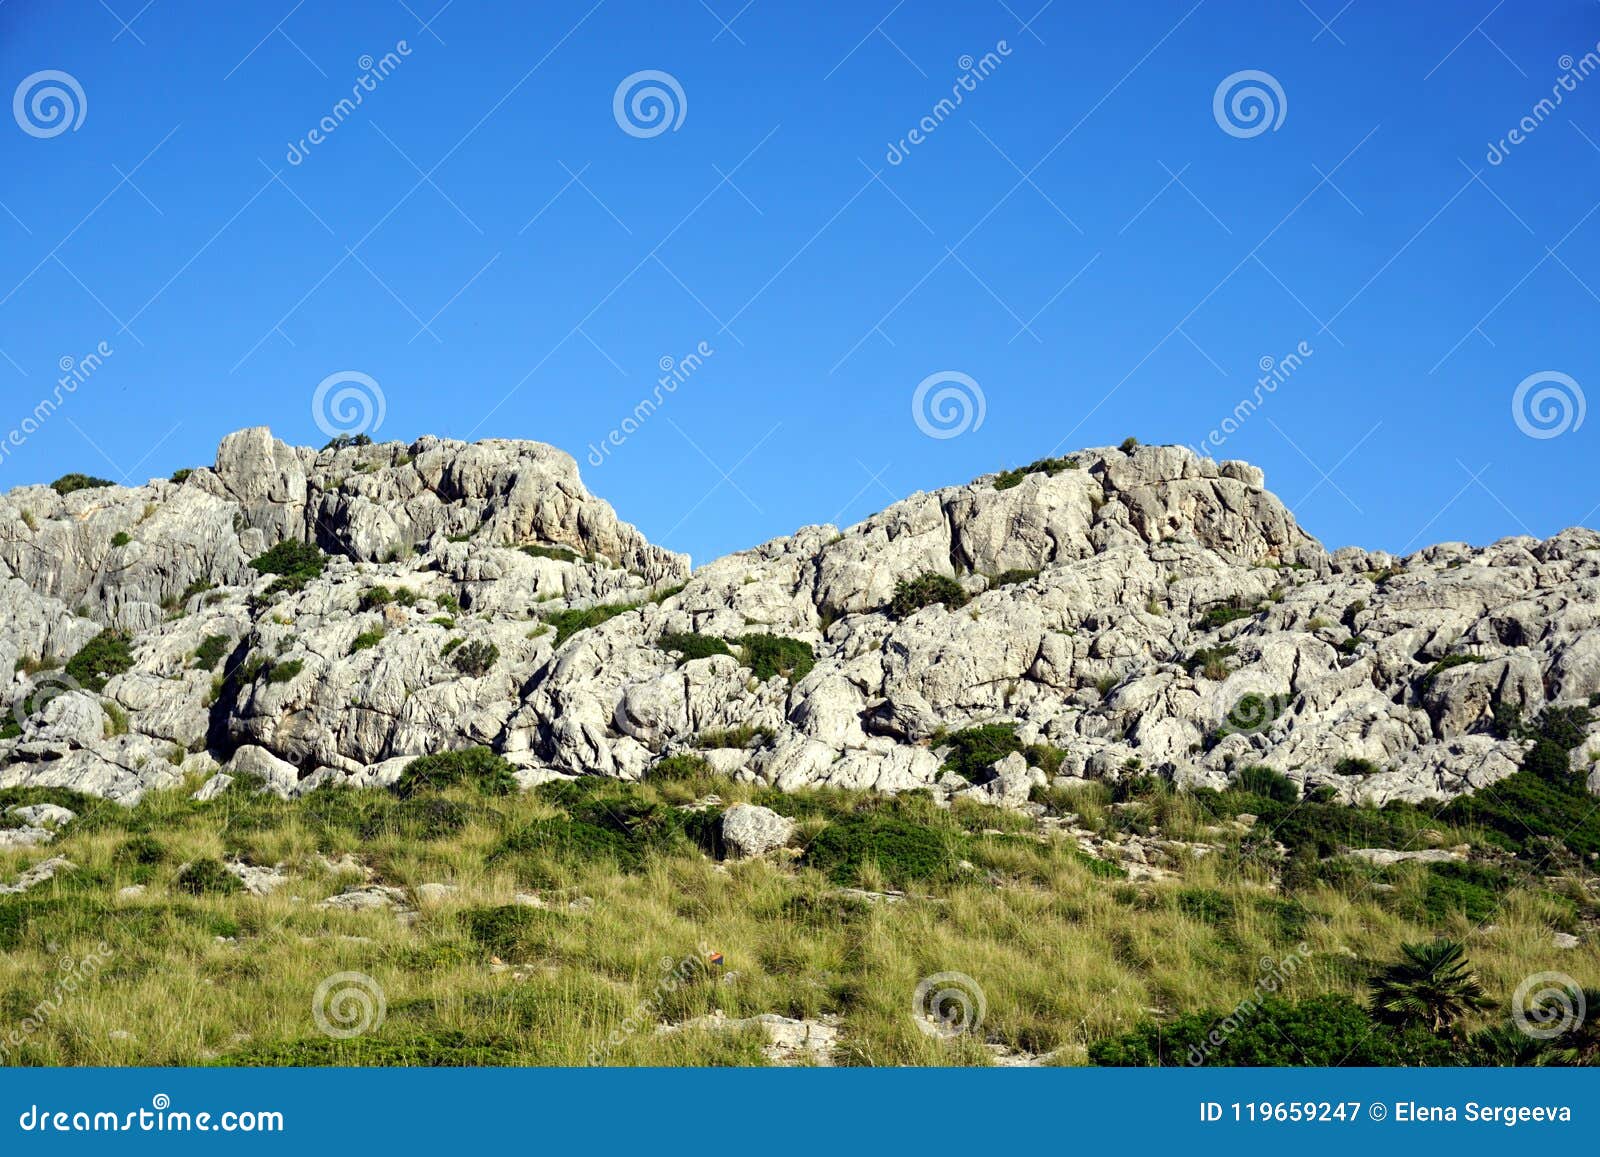 rocks and clear the blue sky and green grass